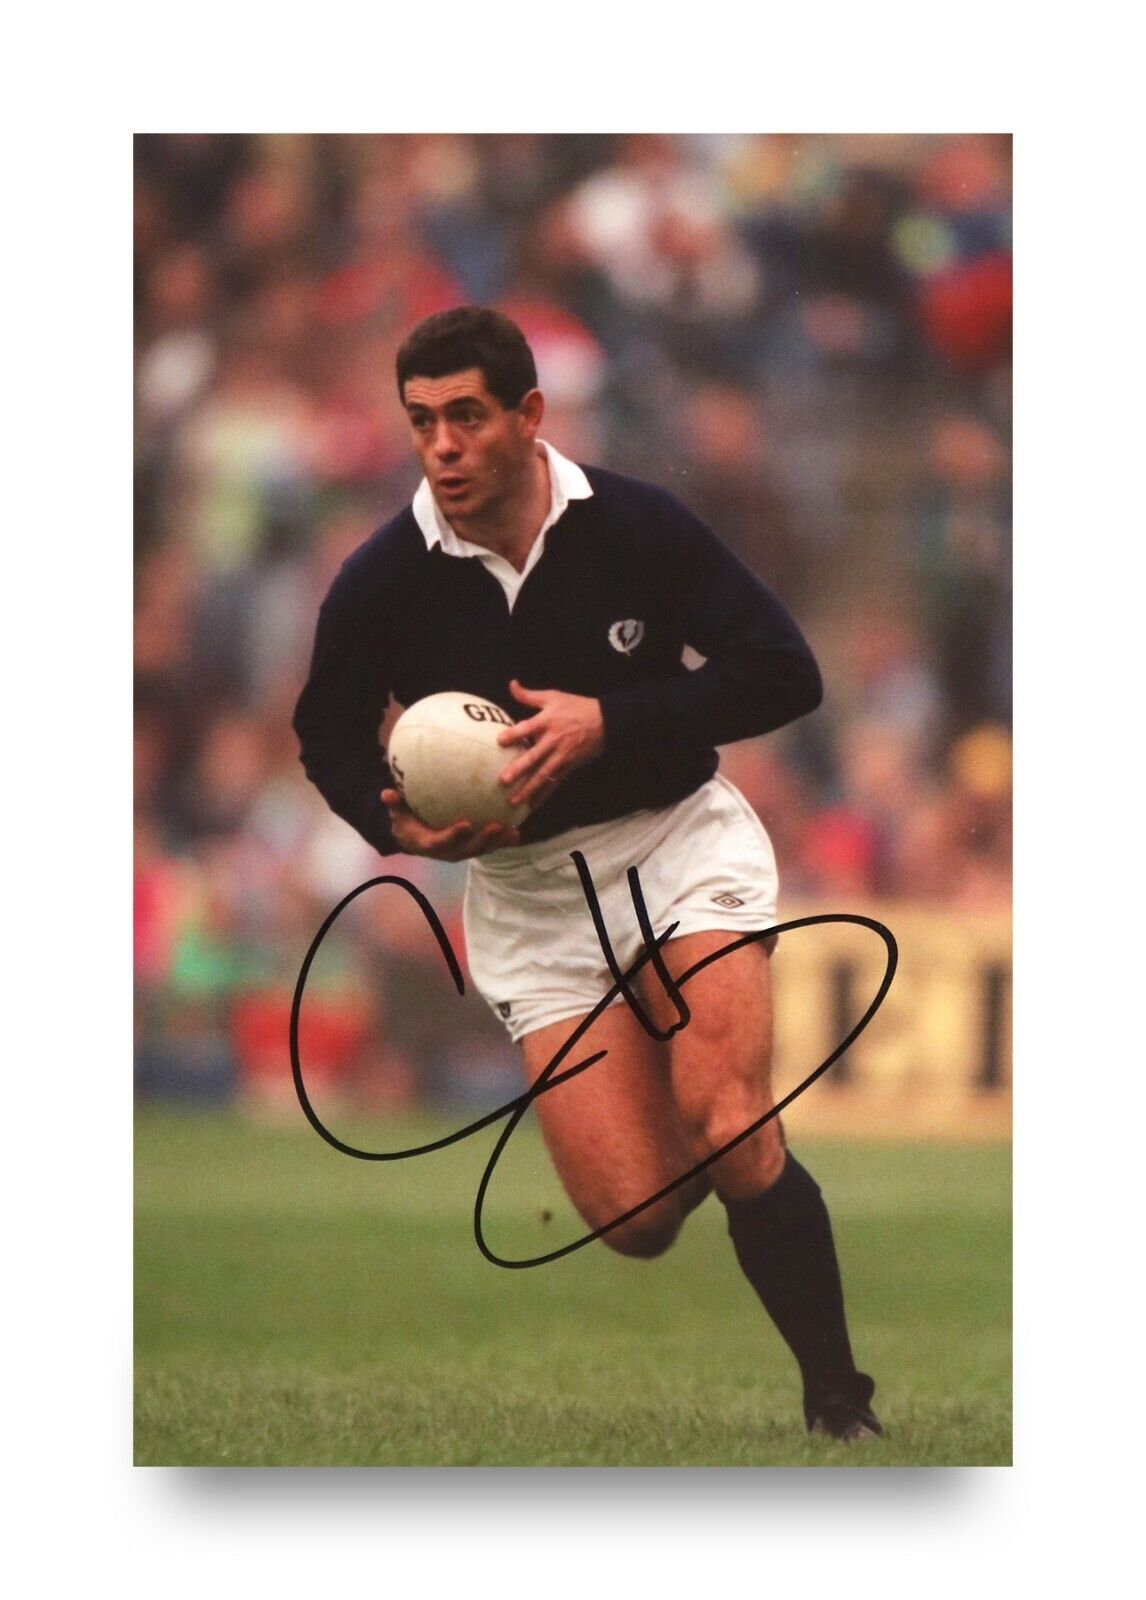 Gavin Hastings Signed 6x4 Photo Poster painting Scotland Rugby Union Autograph Memorabilia + COA